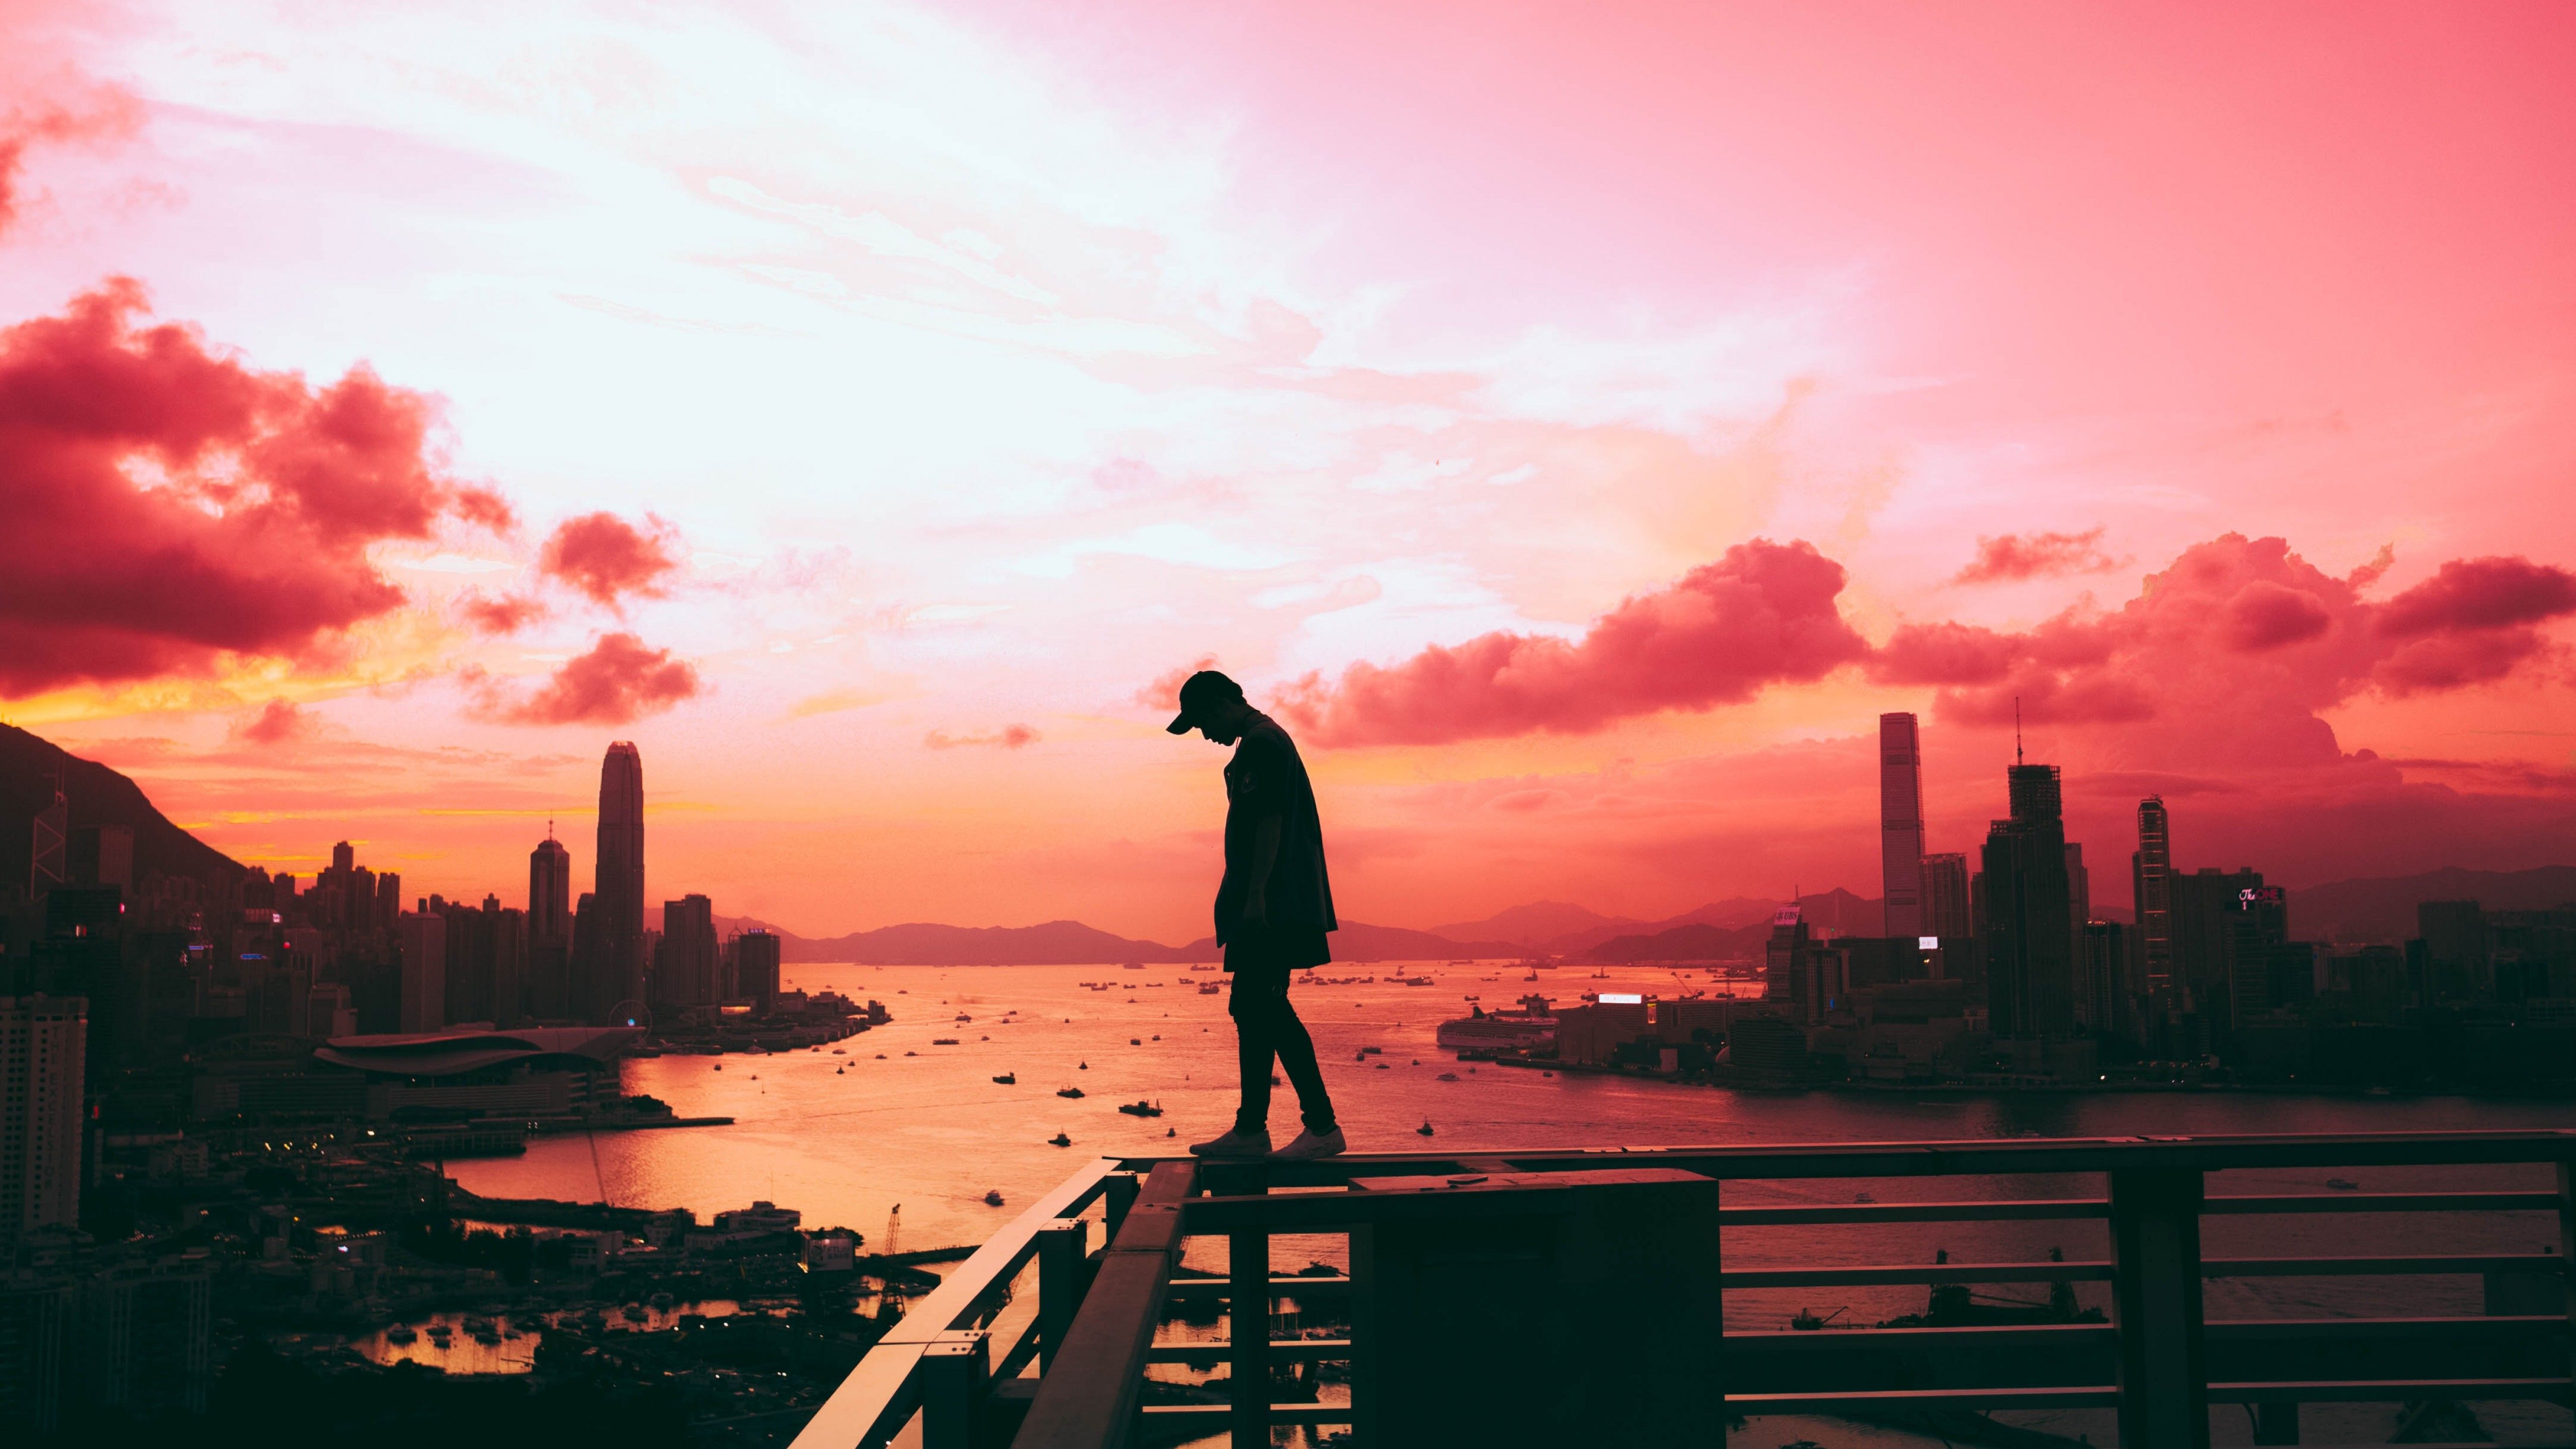 Alone 4K Wallpaper, Silhouette, Cityscape, Hong Kong City, Pink sky, Skyscrapers, River, Lifestyle